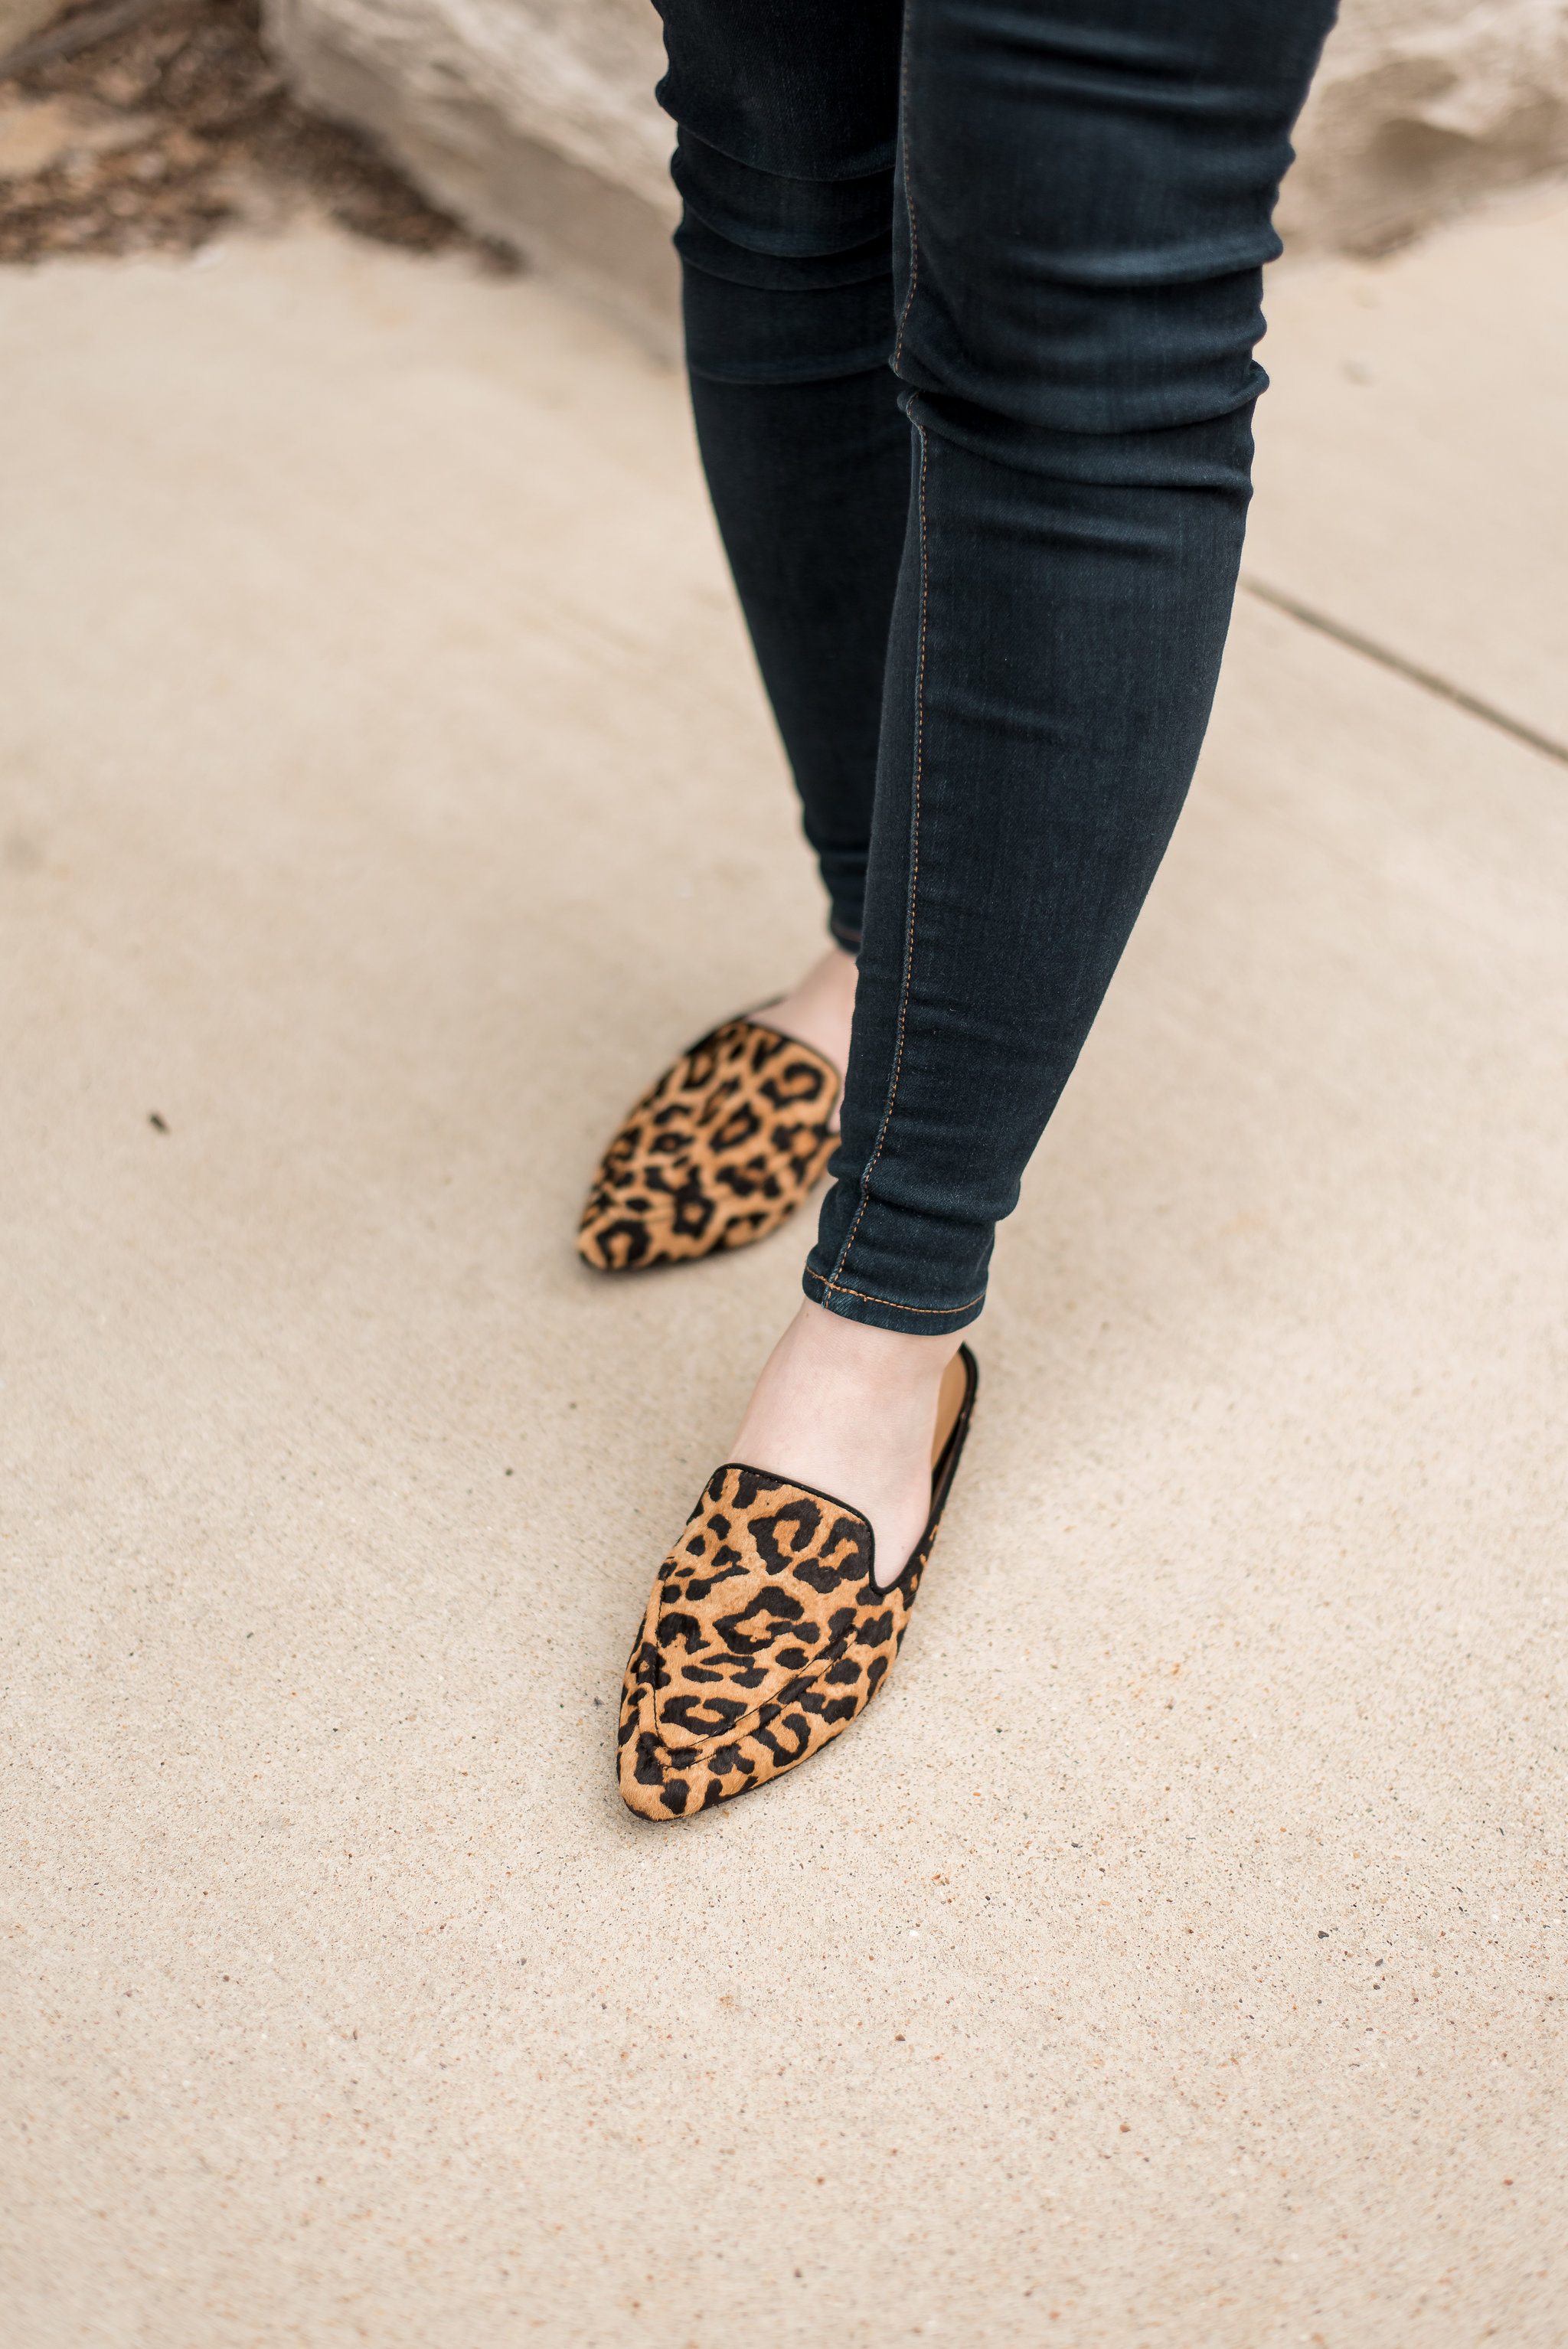 dc woman style blogger wearing Franco Sarto Leopard Print Mules